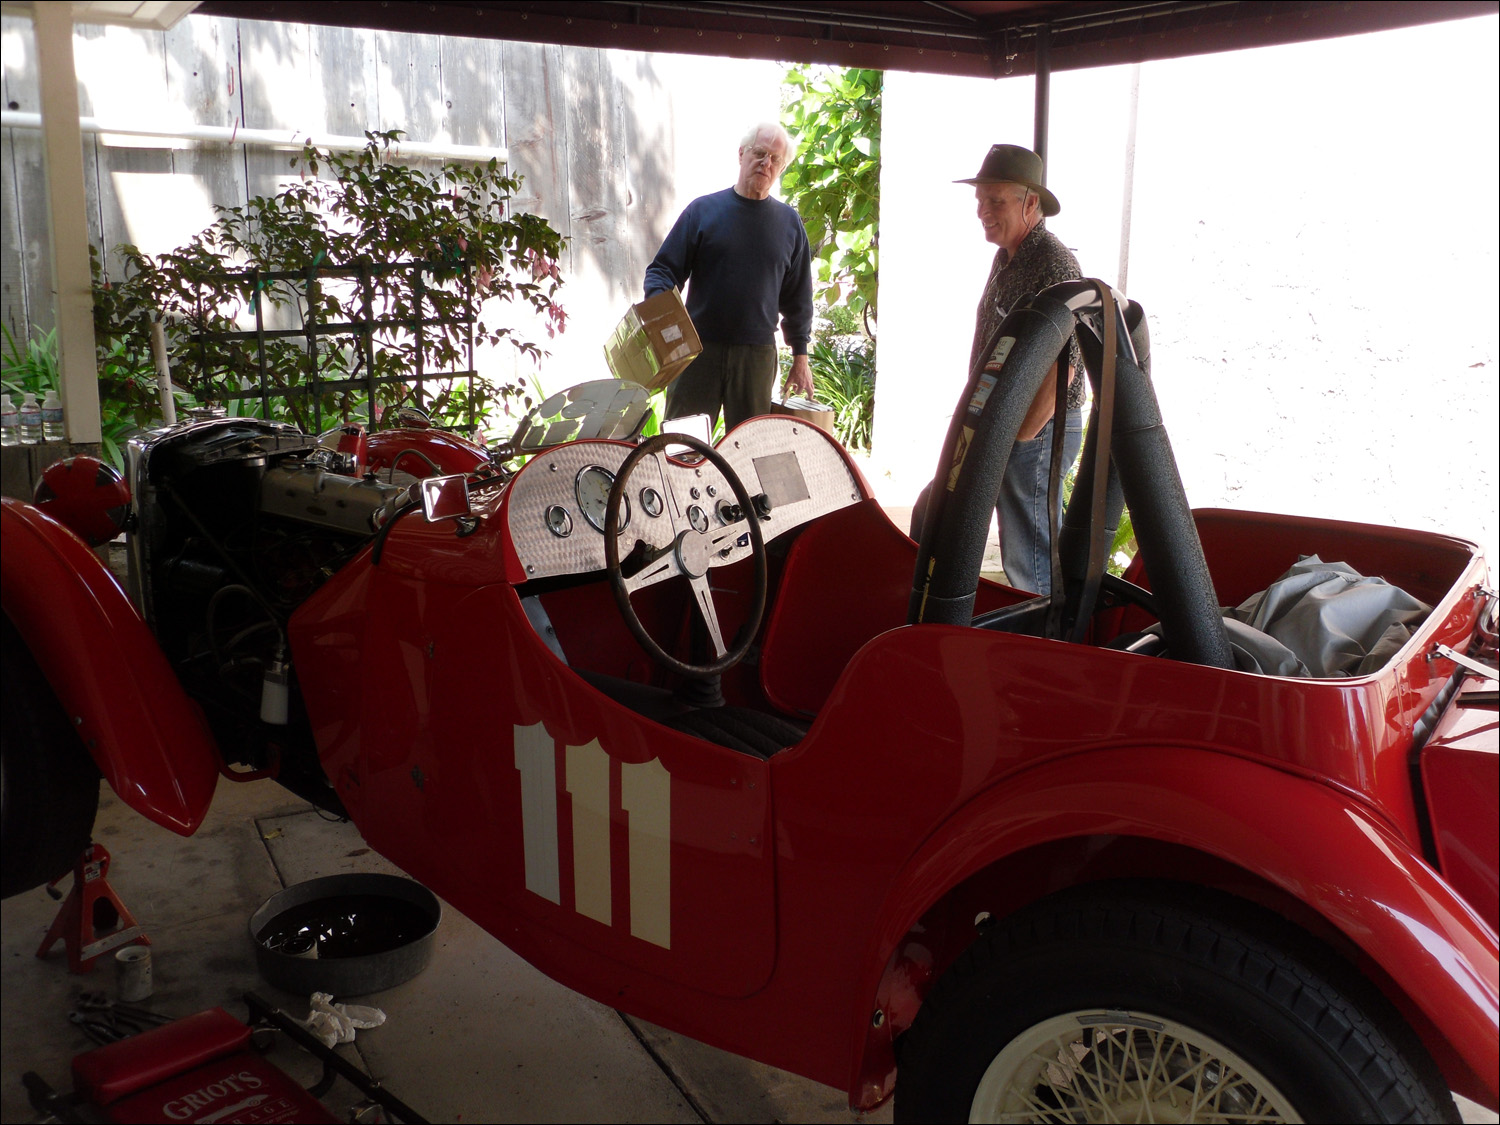 Don Martine readying his MG to race